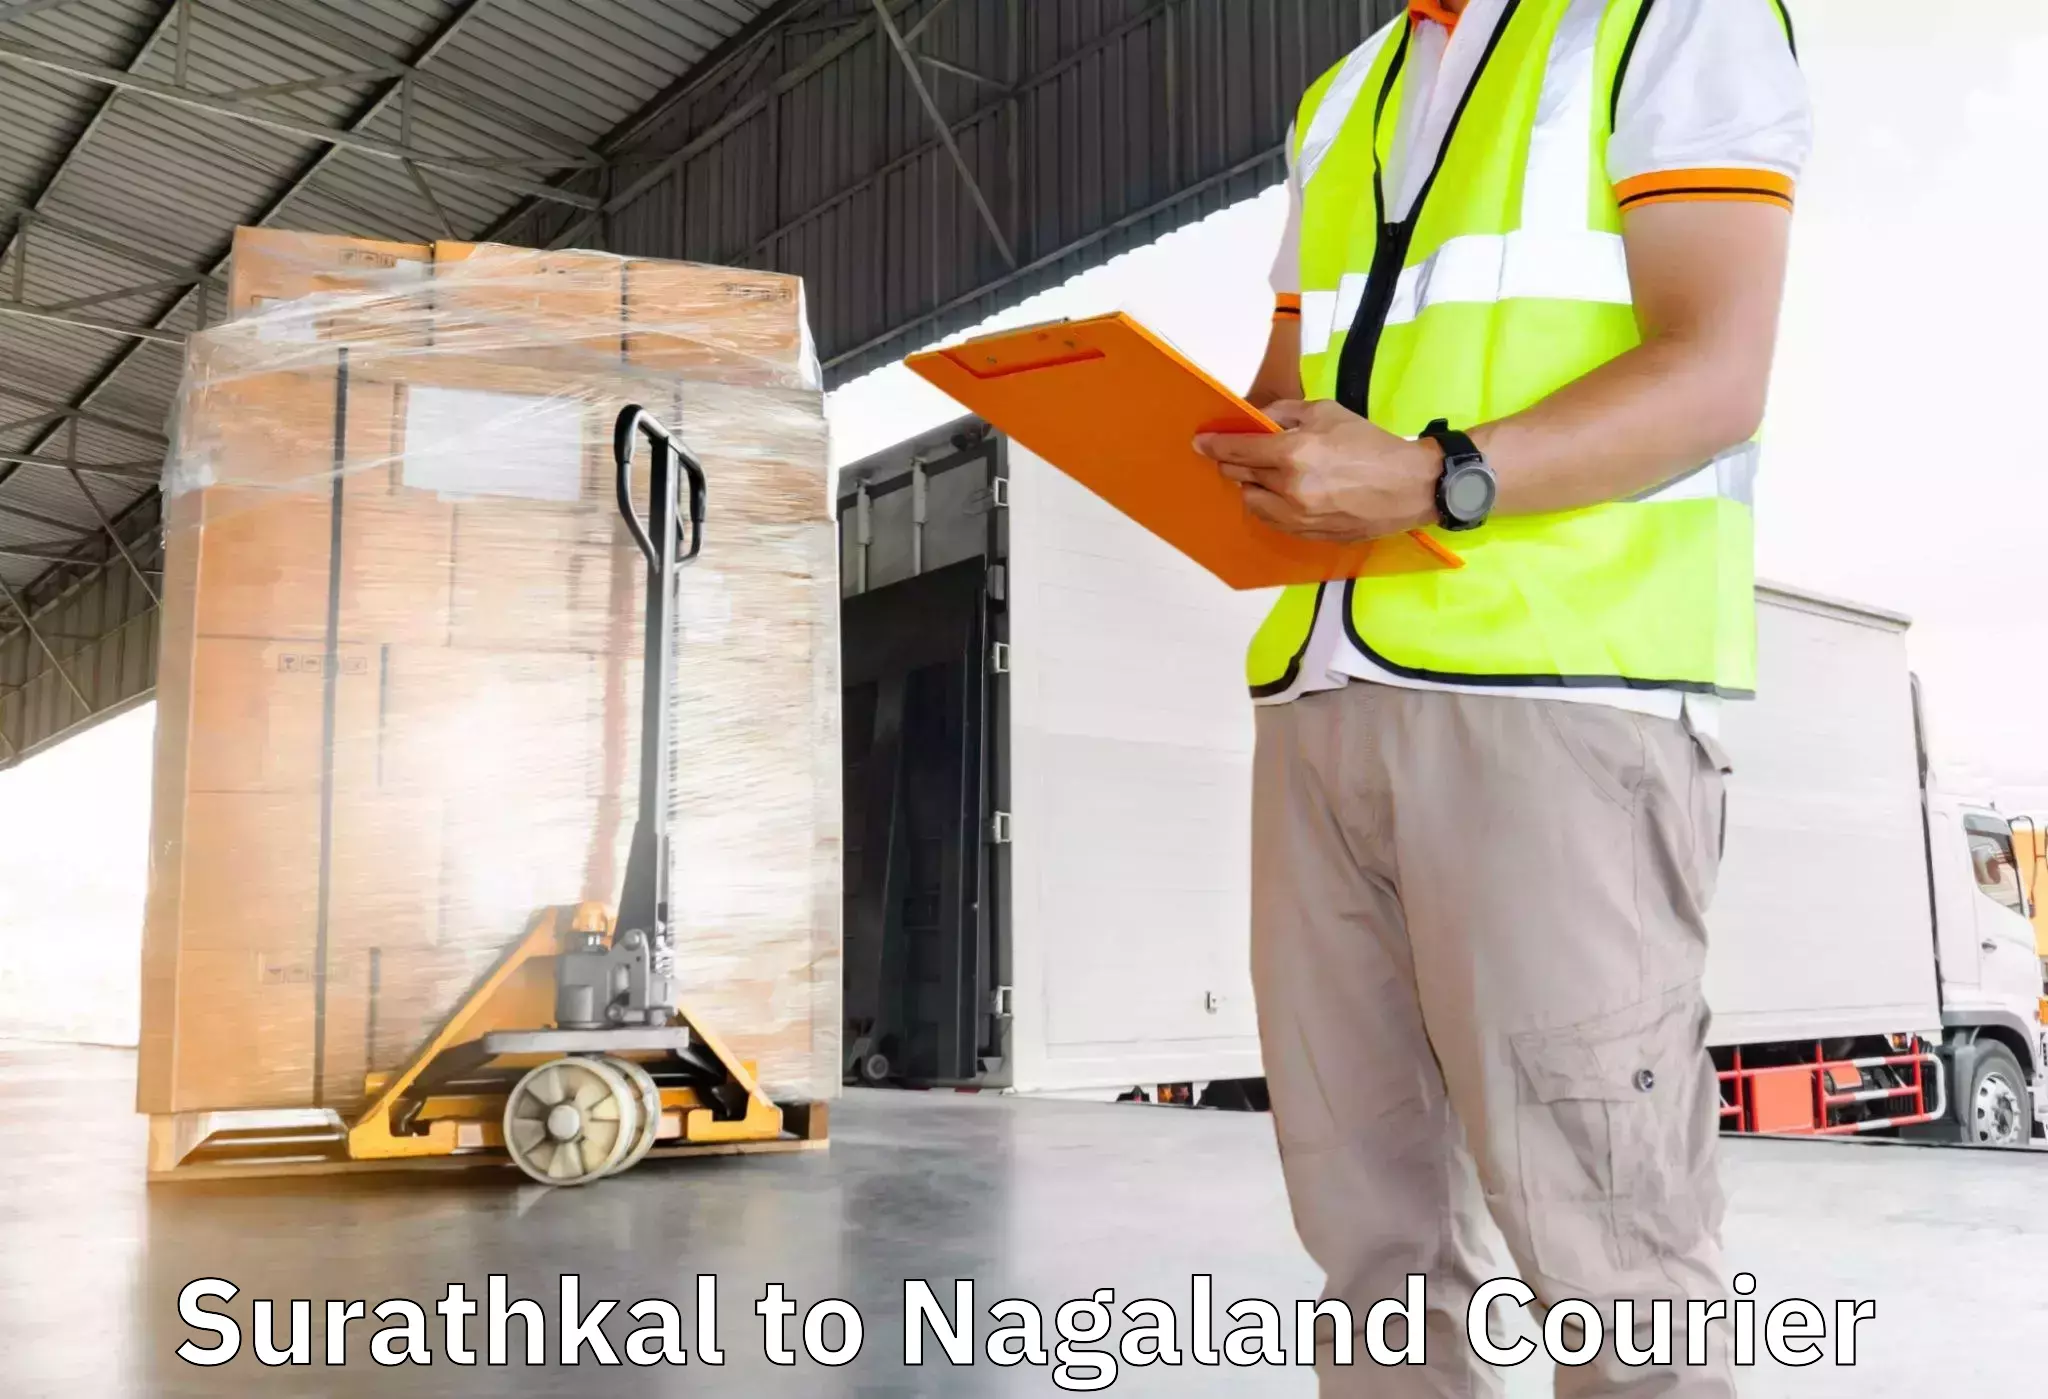 Furniture moving experts Surathkal to Nagaland